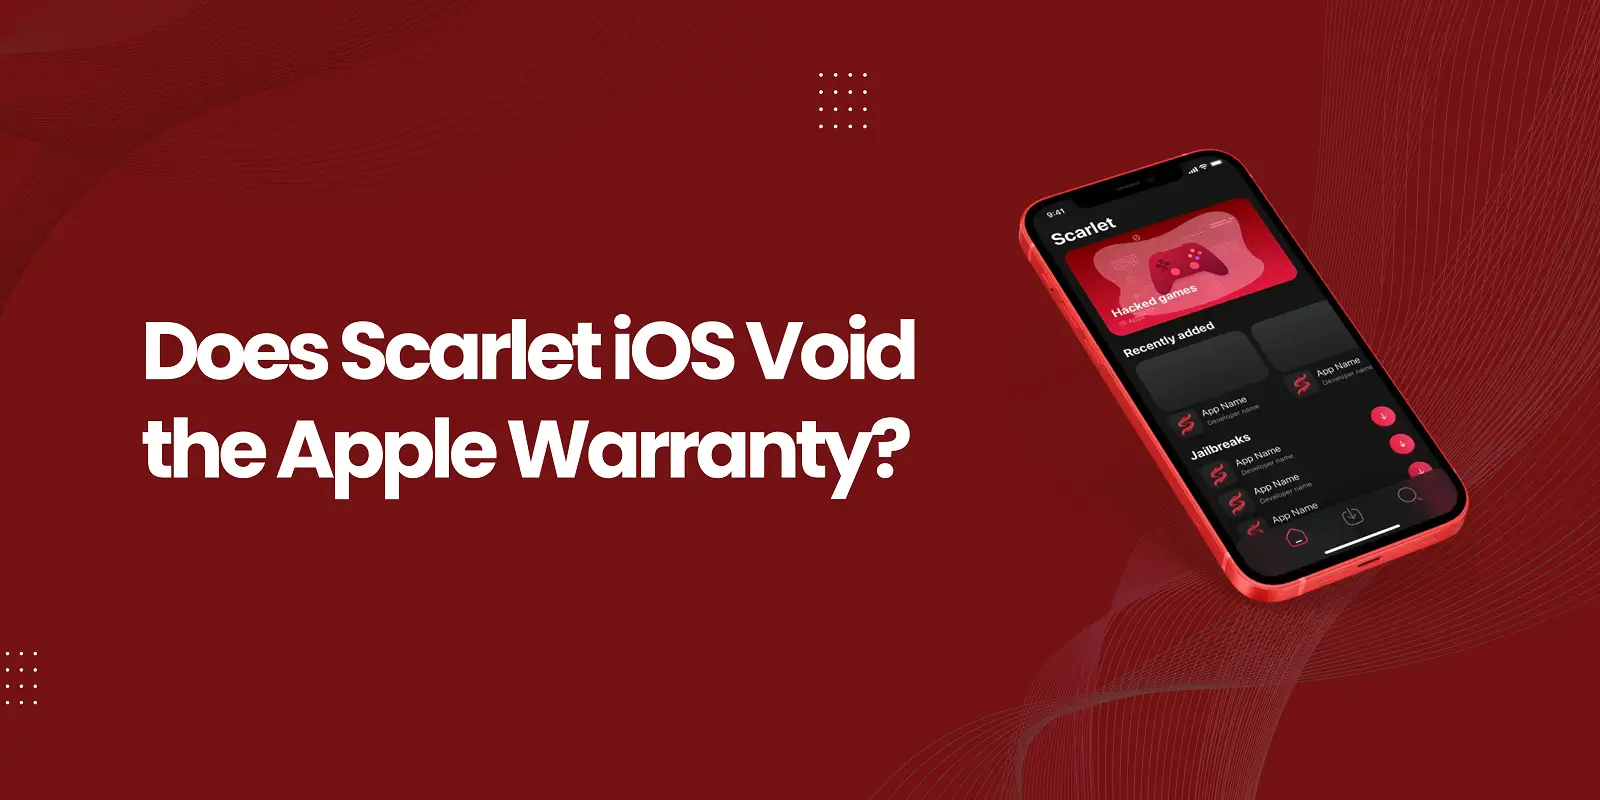 Does Scarlet iOS Void the Apple Warranty?